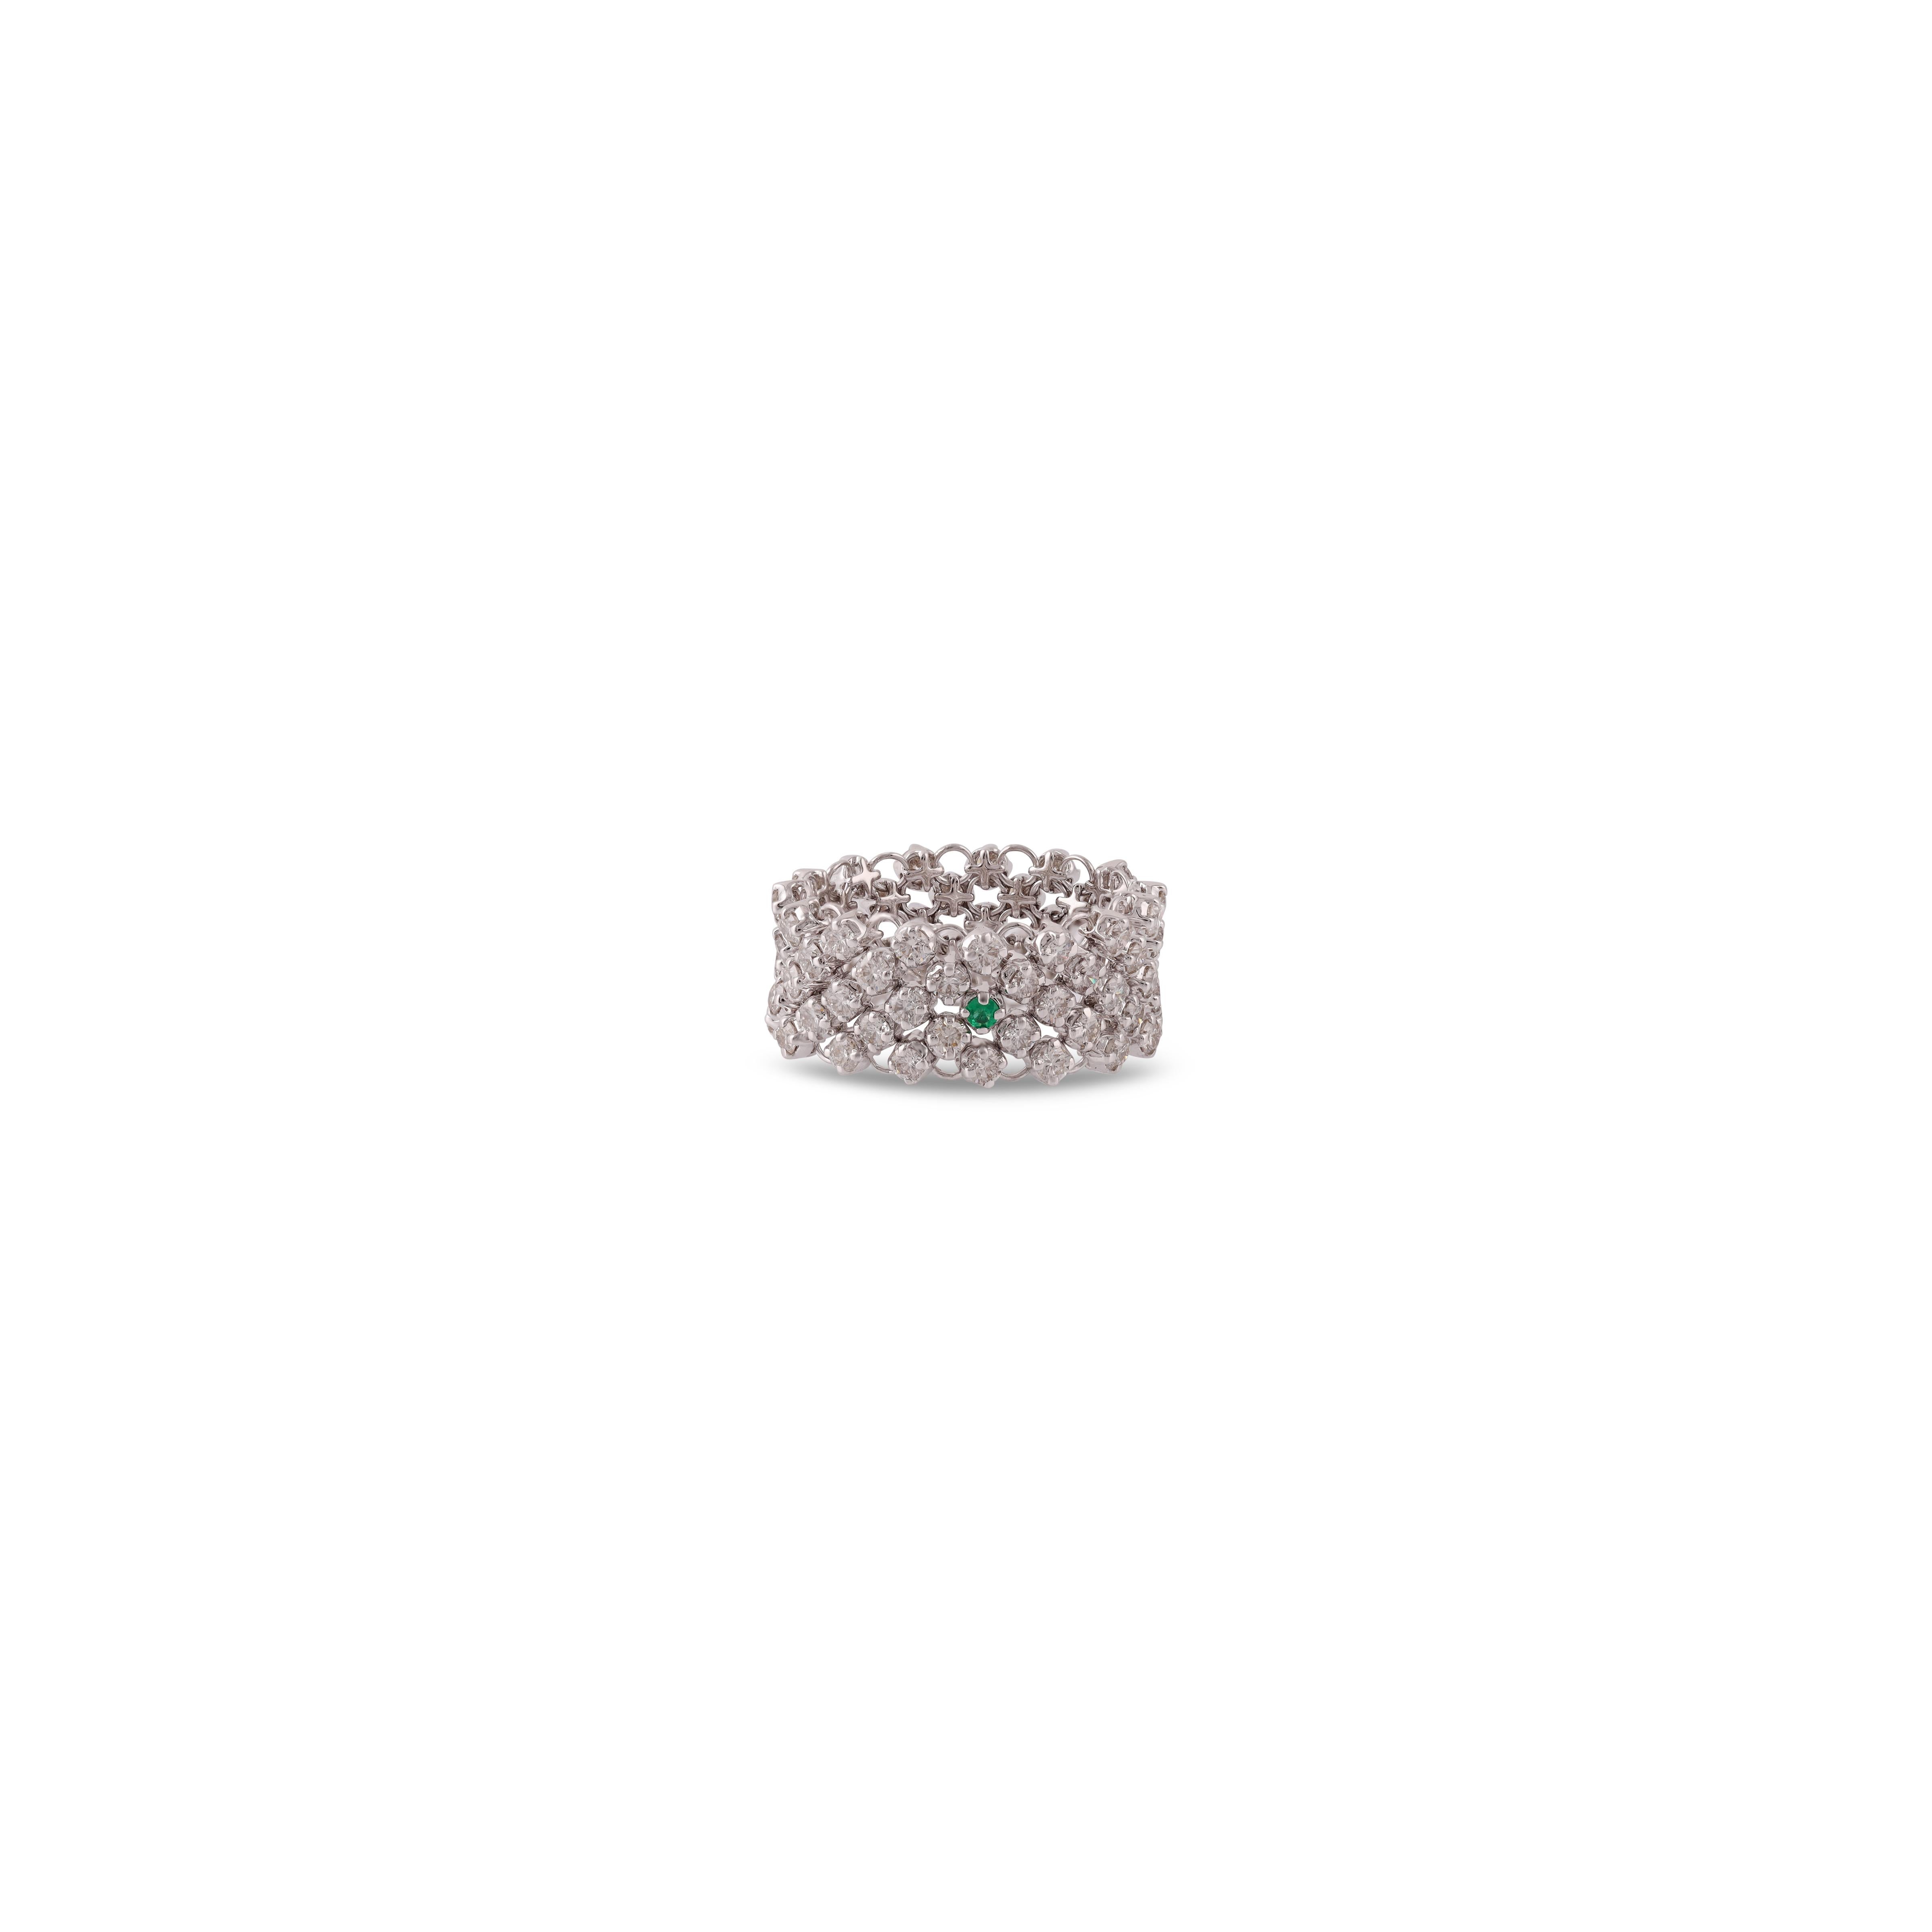 Emerald (0.03 Carat) Very Fine Quality.
Diamond ((2.93 Carat) Very Fine Quality.

The quality of each of these Diamond  is also top notch. Every stone has beautiful transparency and sparkle. You will love staring at the colors as they show their